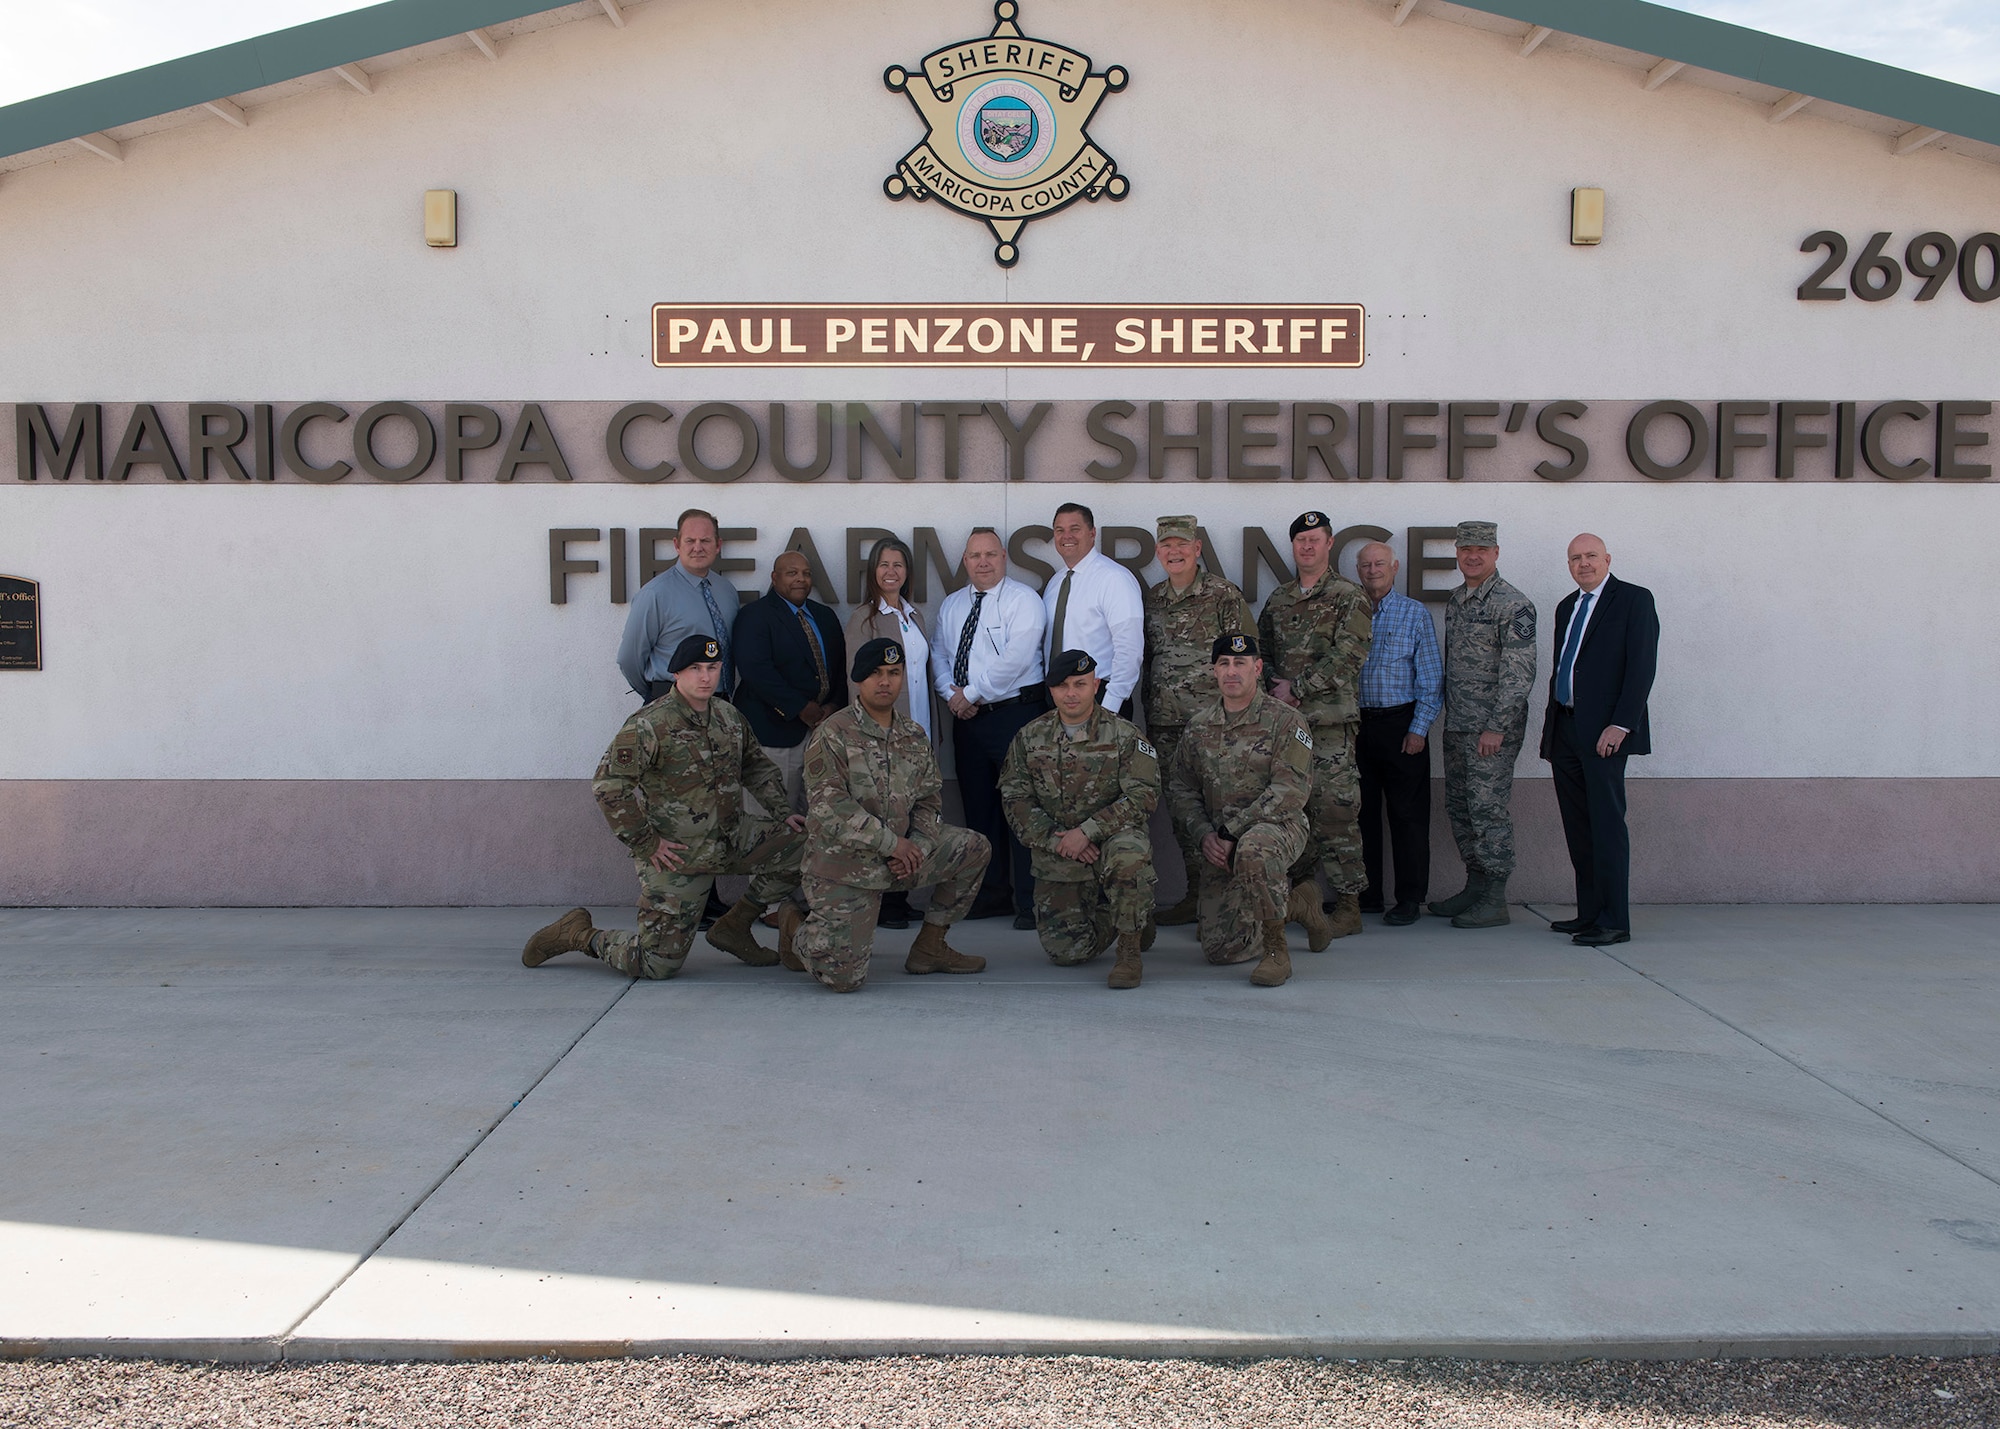 Luke Air Force Base and Maricopa County Sheriff’s Office personnel pose at the Maricopa County Sheriff’s Office Firing Range in Buckeye, Ariz., Feb. 25, 2019.